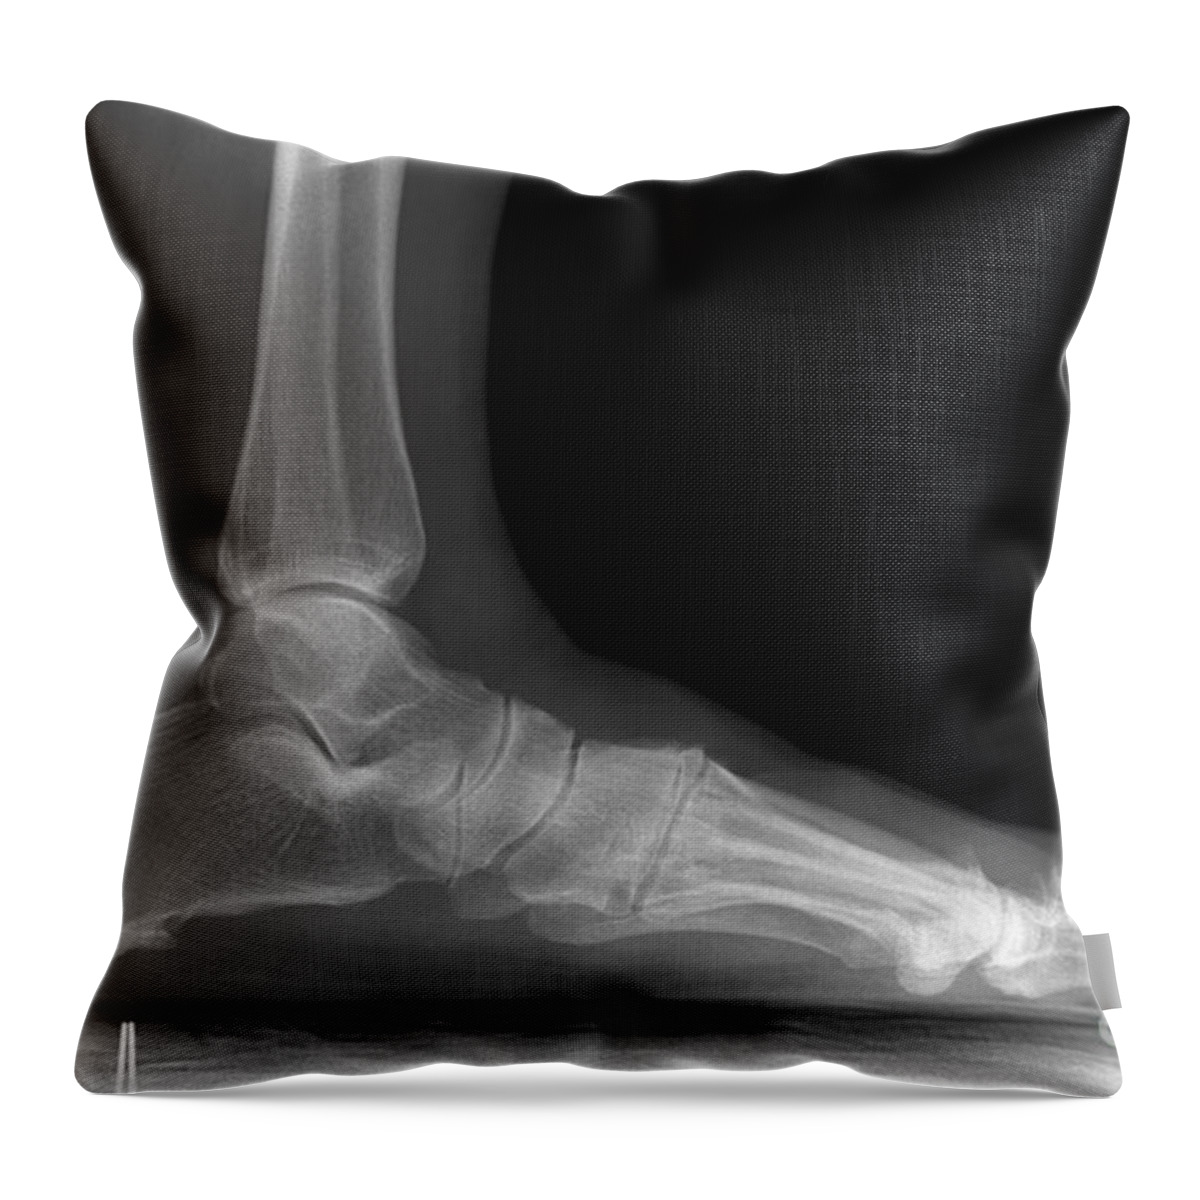 Joint Throw Pillow featuring the photograph Foot X-ray by Ted Kinsman